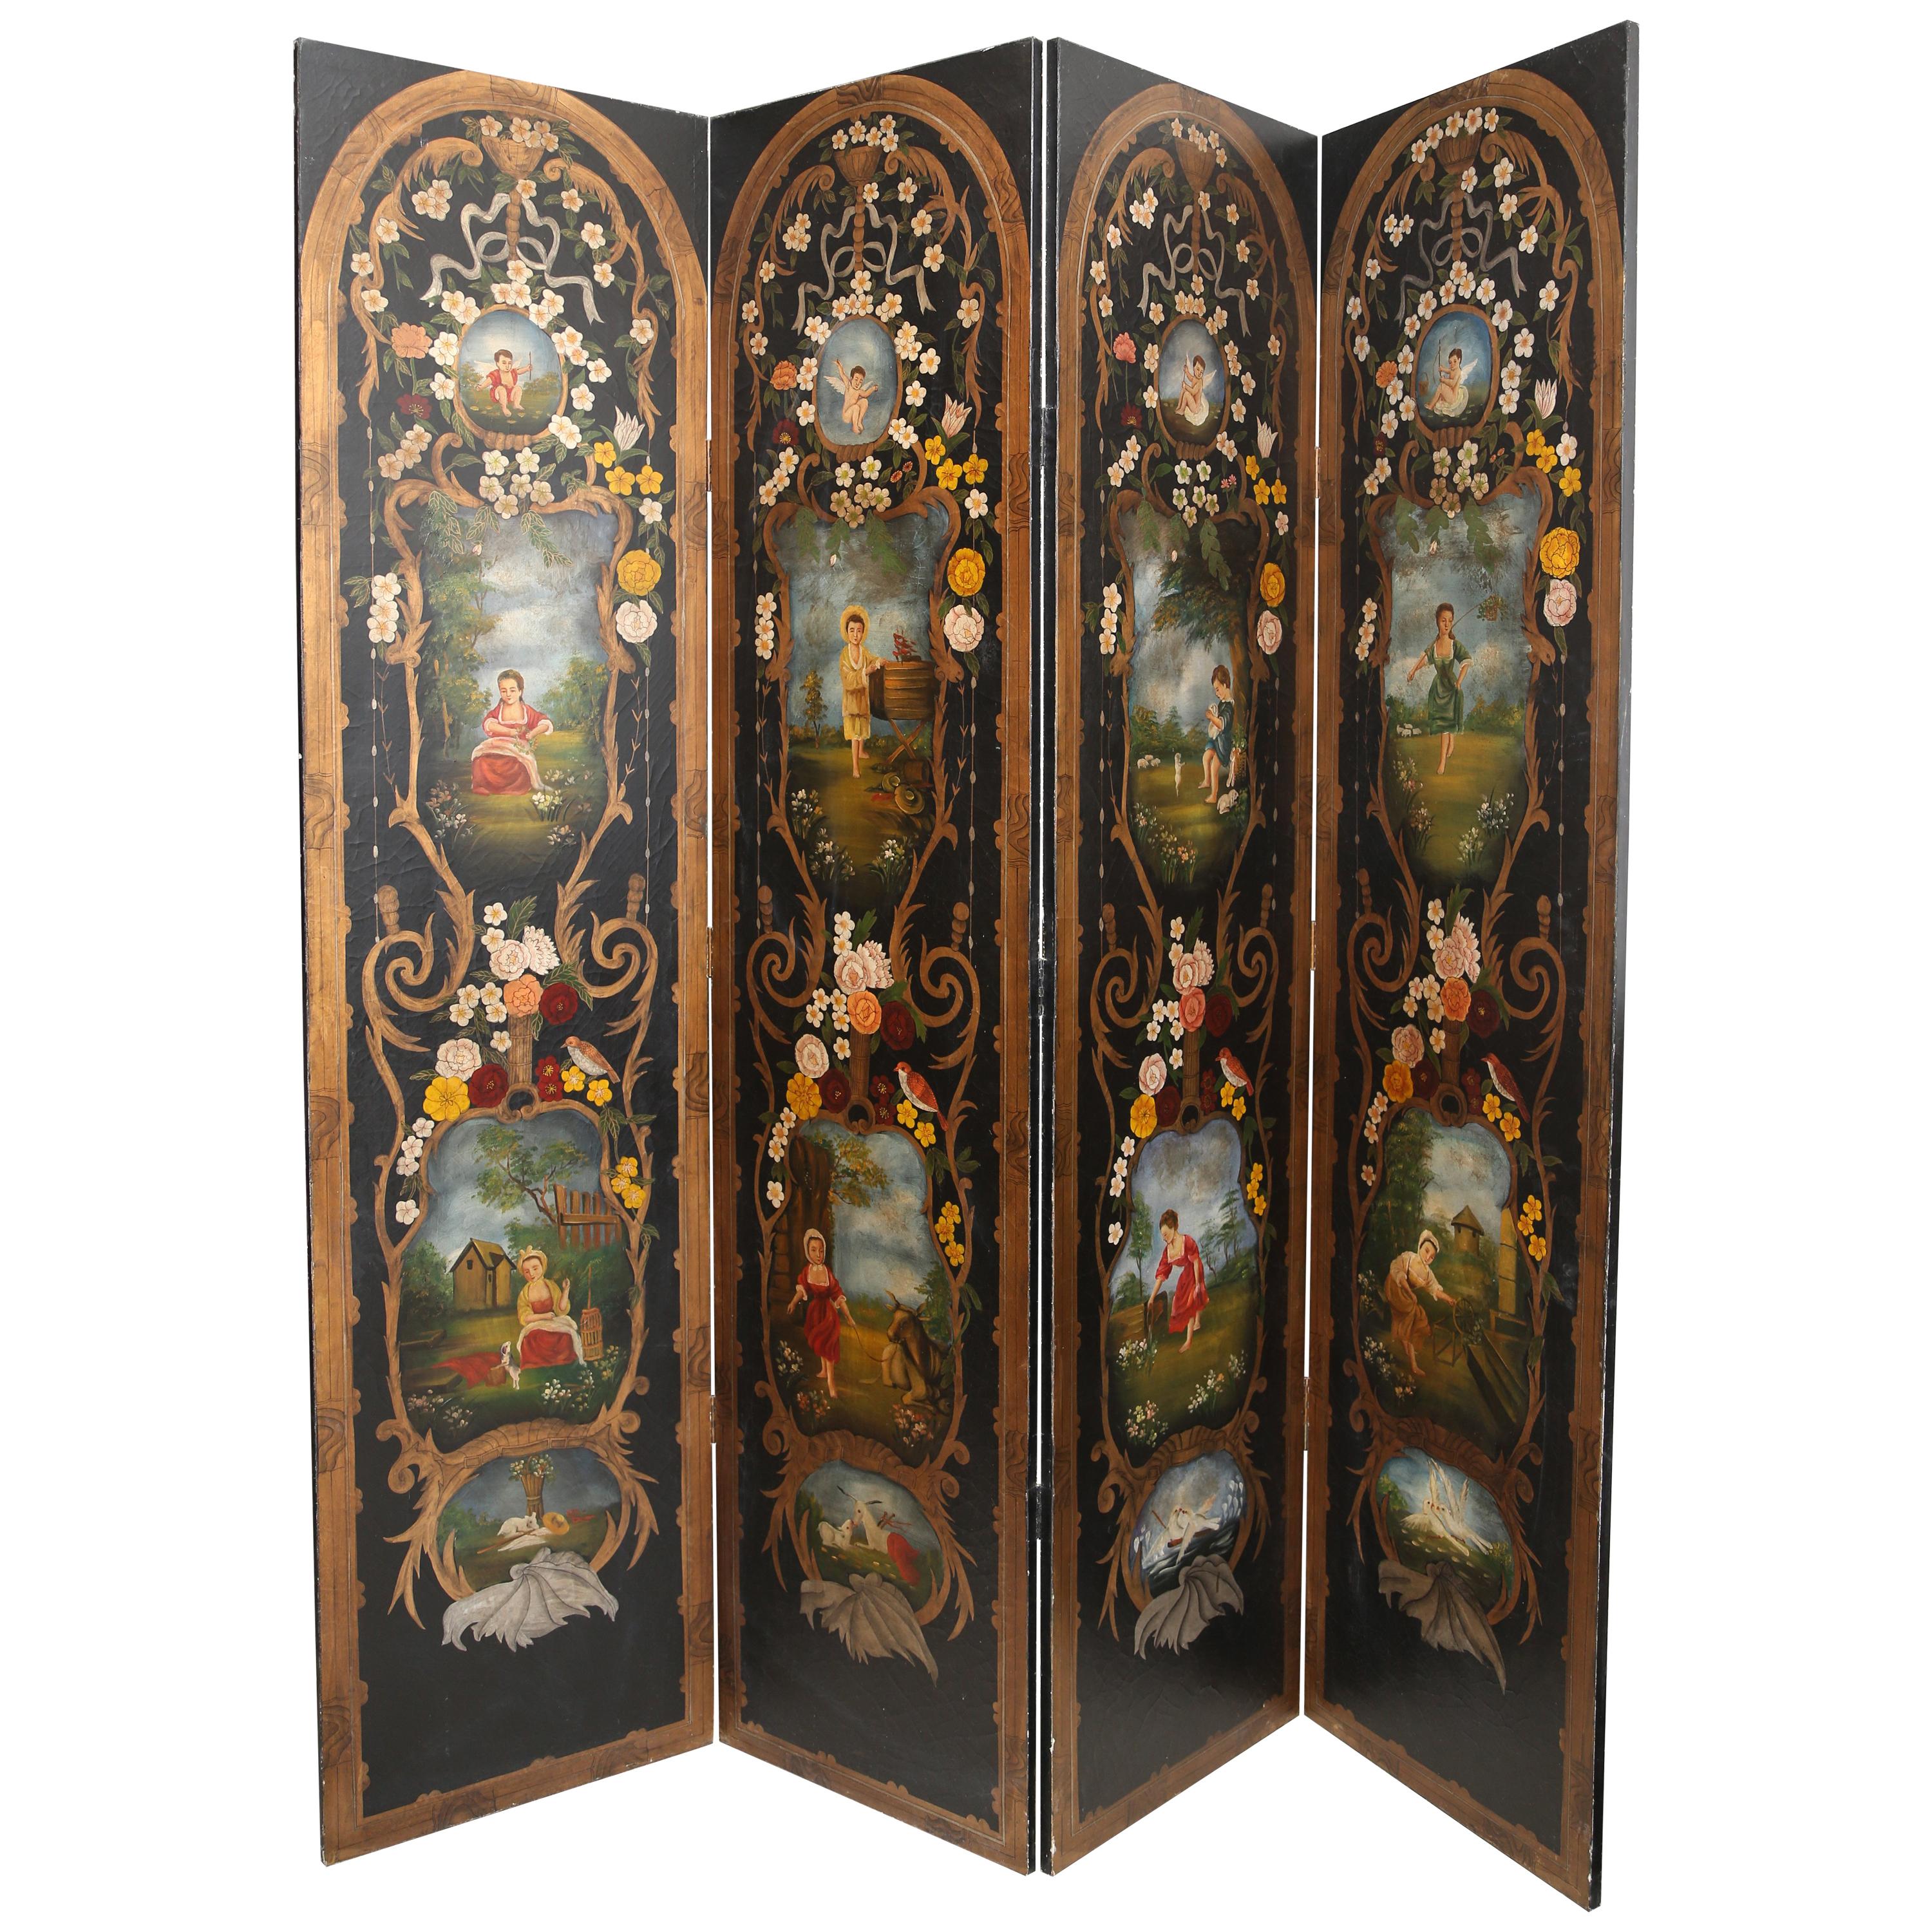 Superb Large 20th Century European Hand Painted Four-Fold Screen